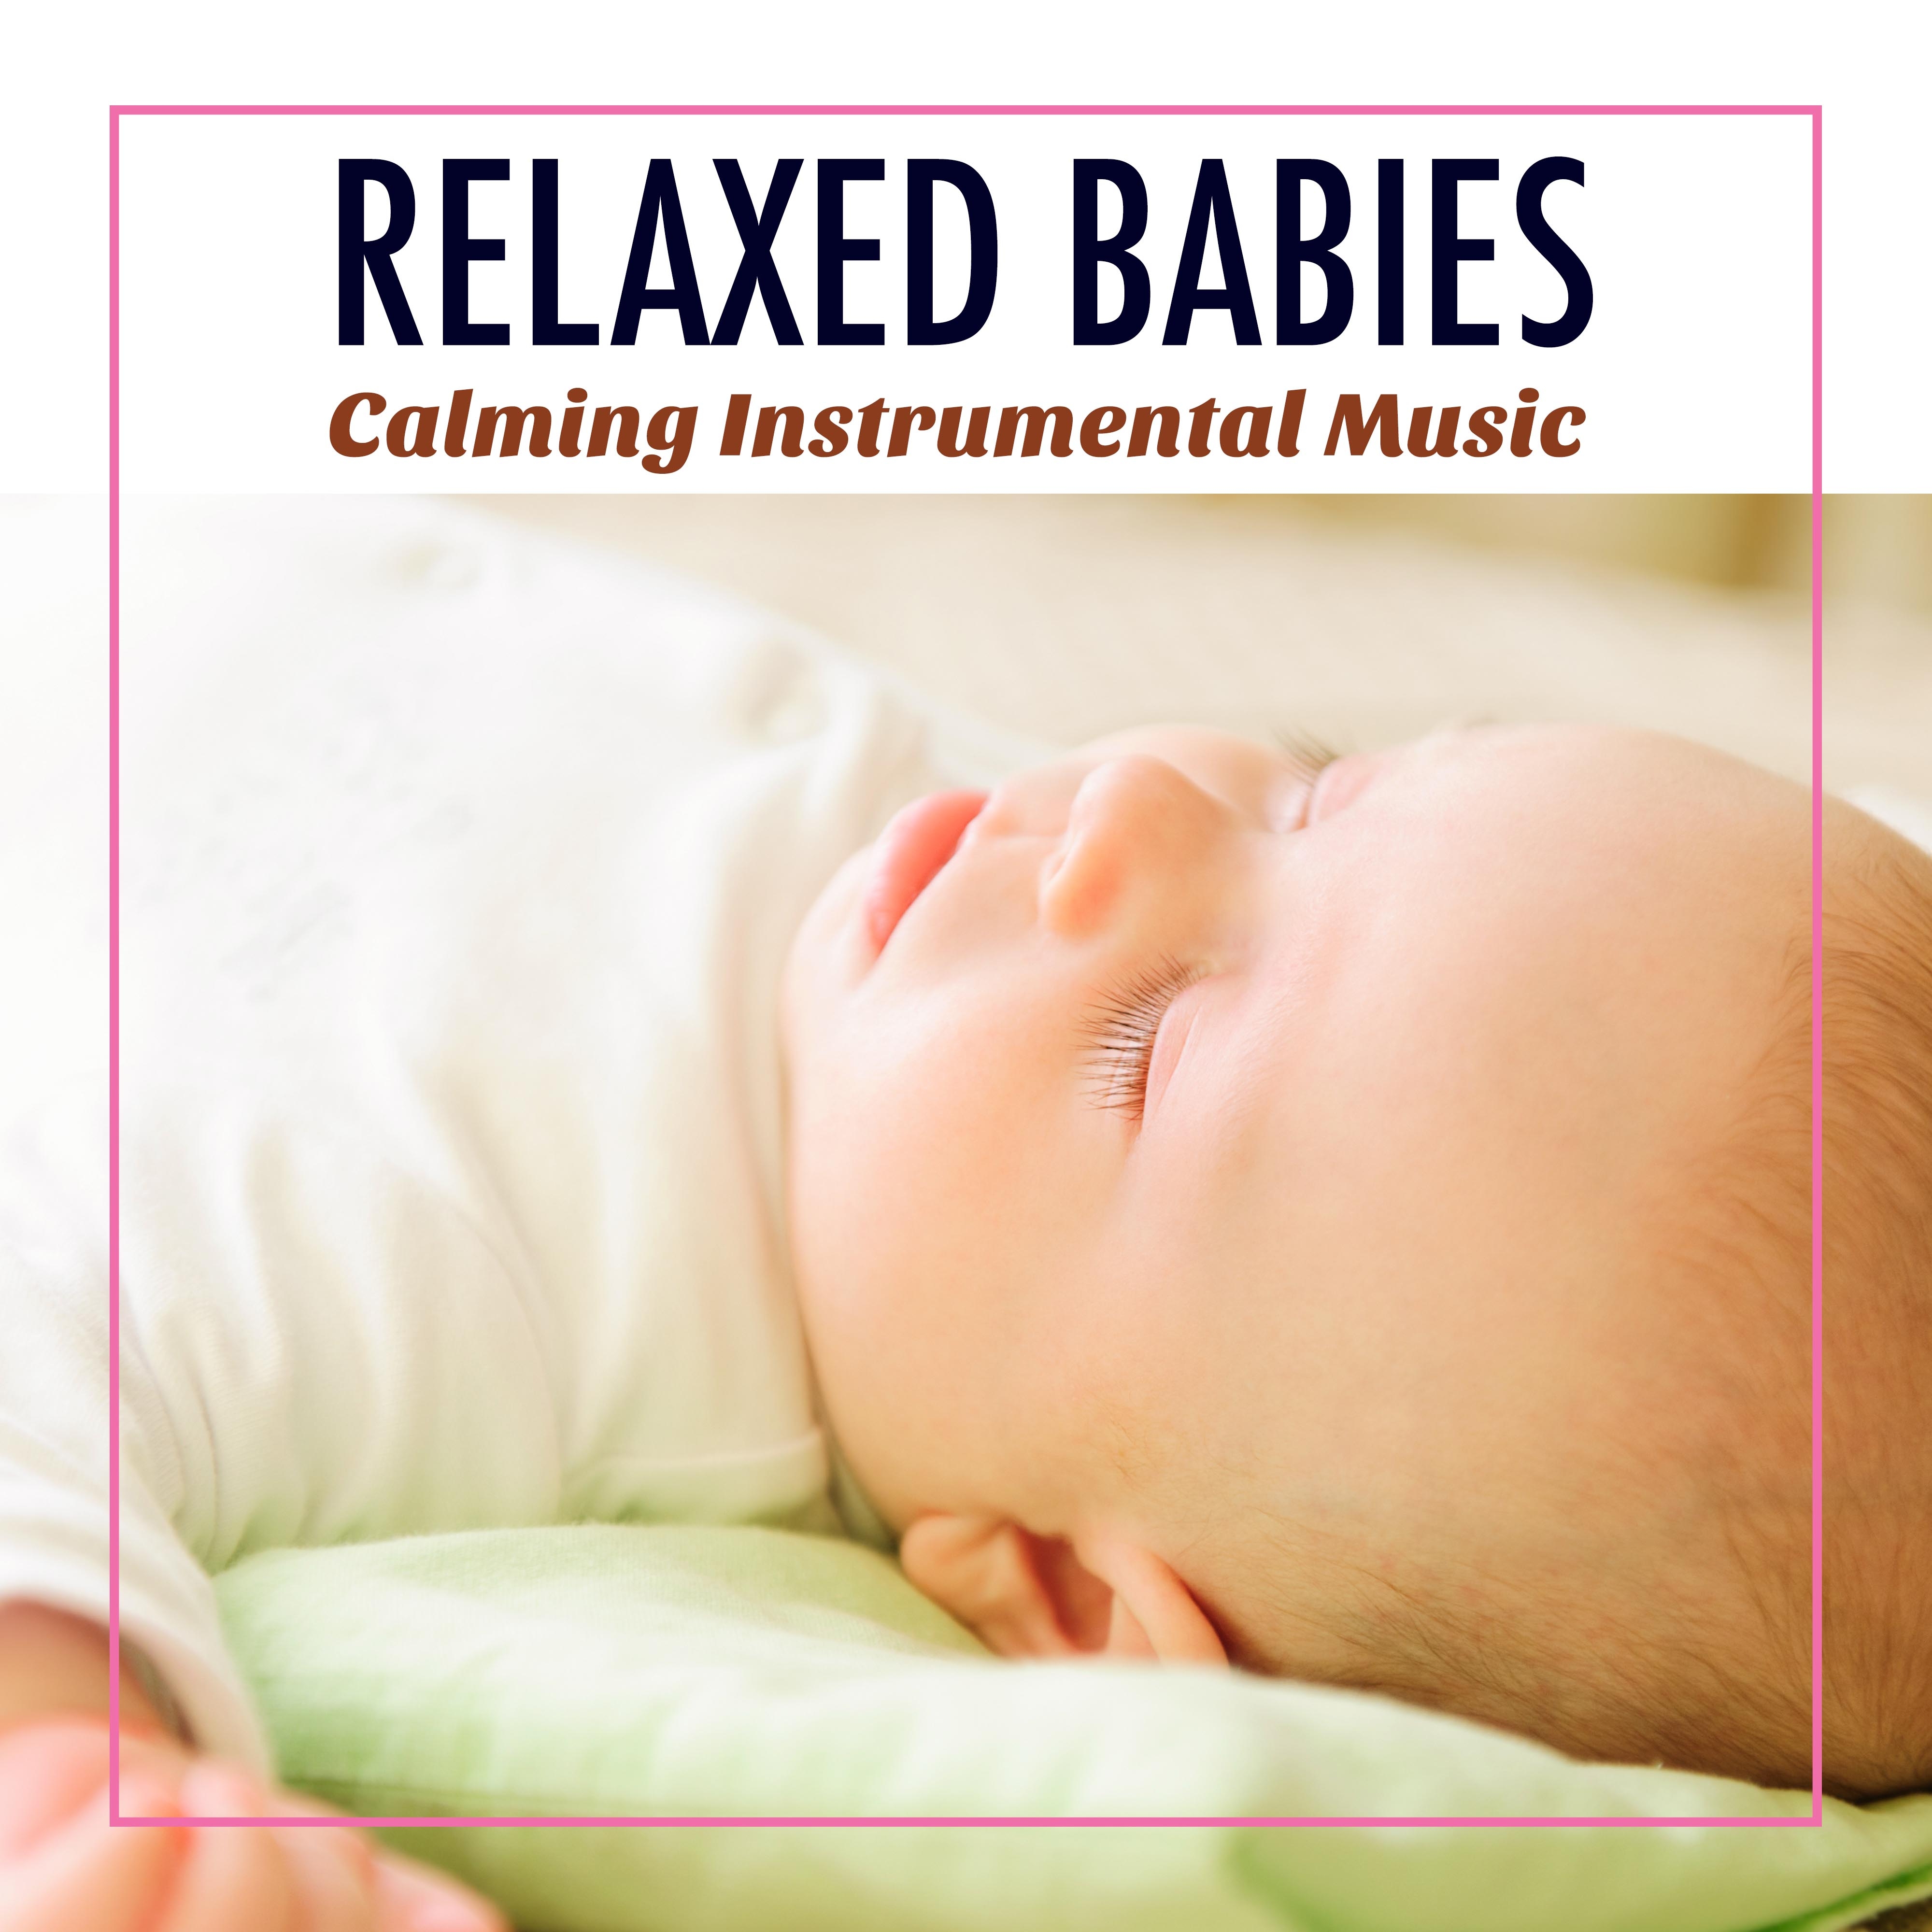 Relaxed Babies - Calming Instrumental Music with Nature Sounds to Help Kids Relax